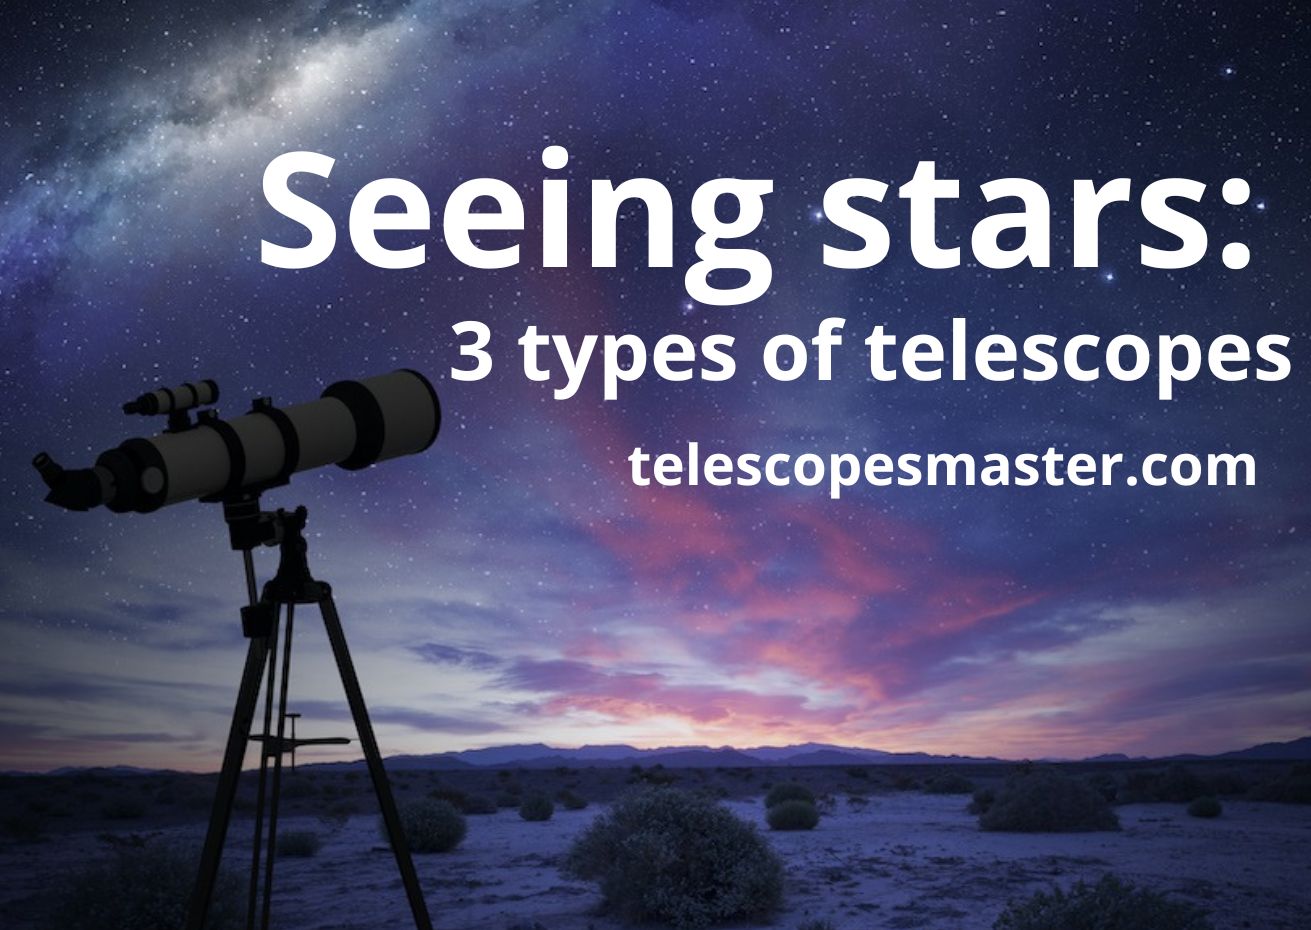 3 types of telescopes: the best detailed guidance